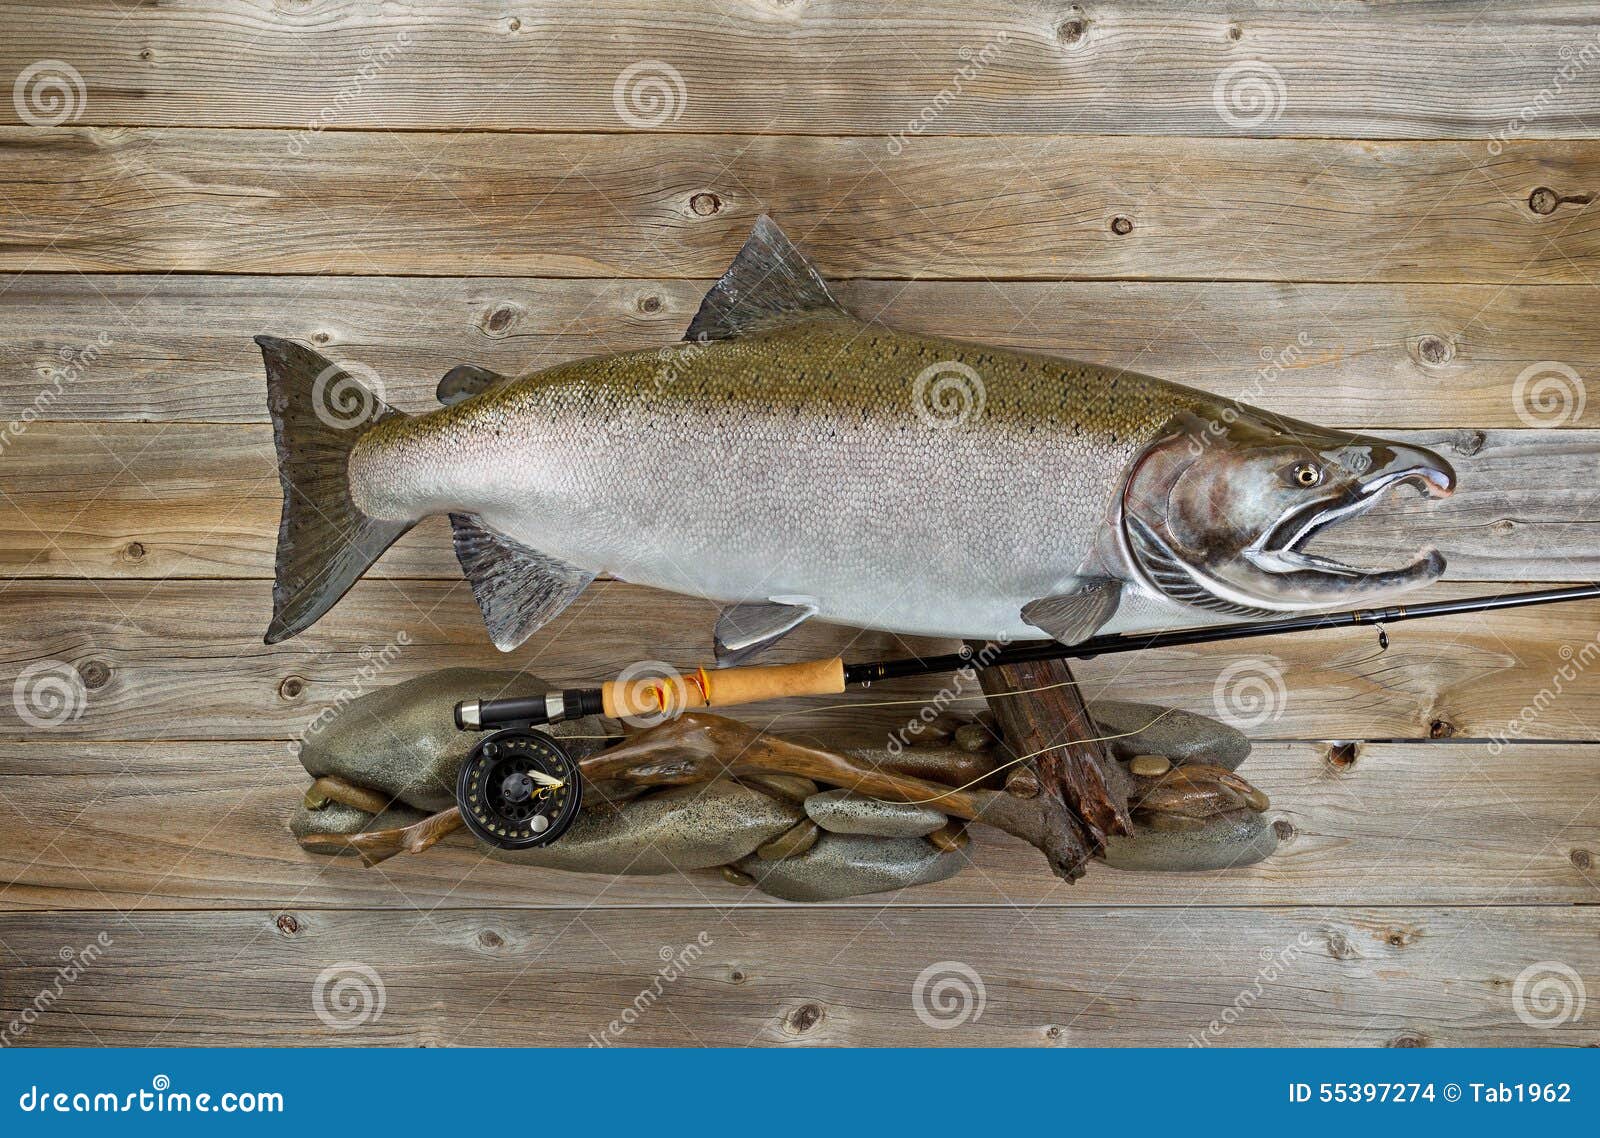 Trophy Salmon with Fishing Gear on Rustic Wood Stock Photo - Image